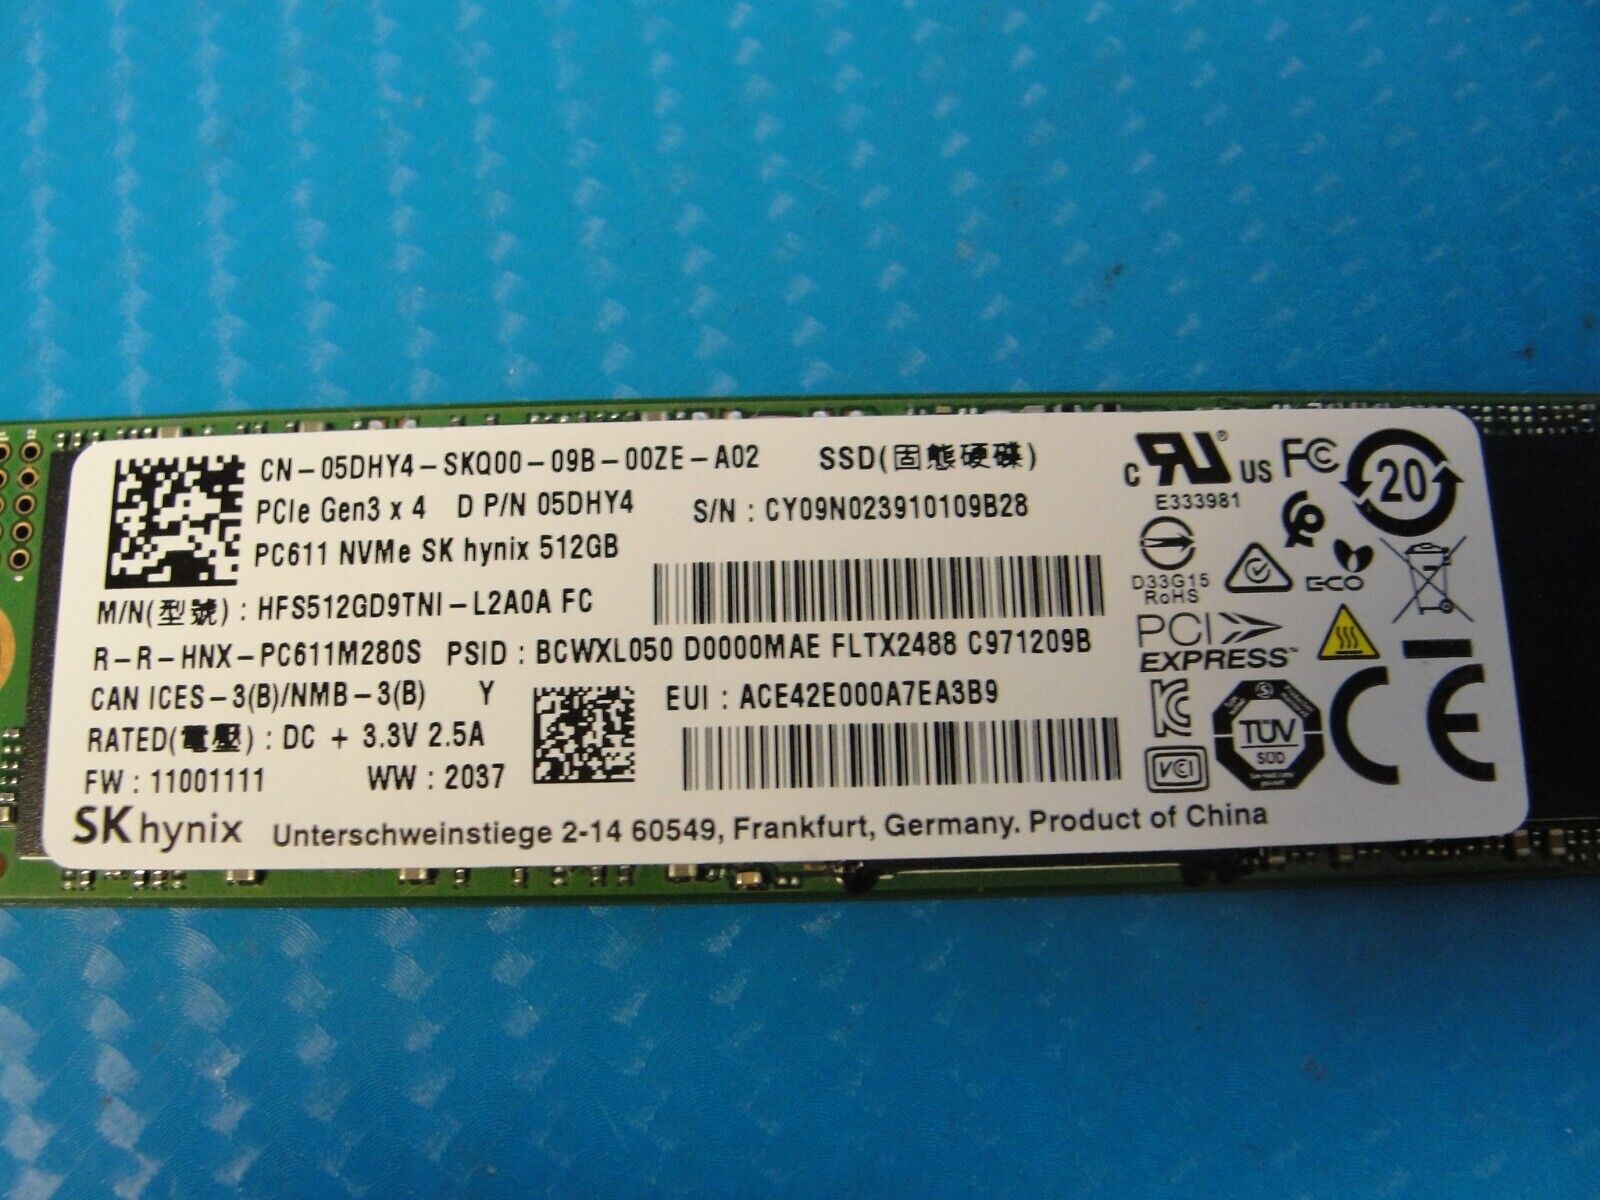 SK hynix PCIe Gen 3x4 NVMe M.2 HFS512GD9TNI-l2A0A 512GB SSD Solid State Drive